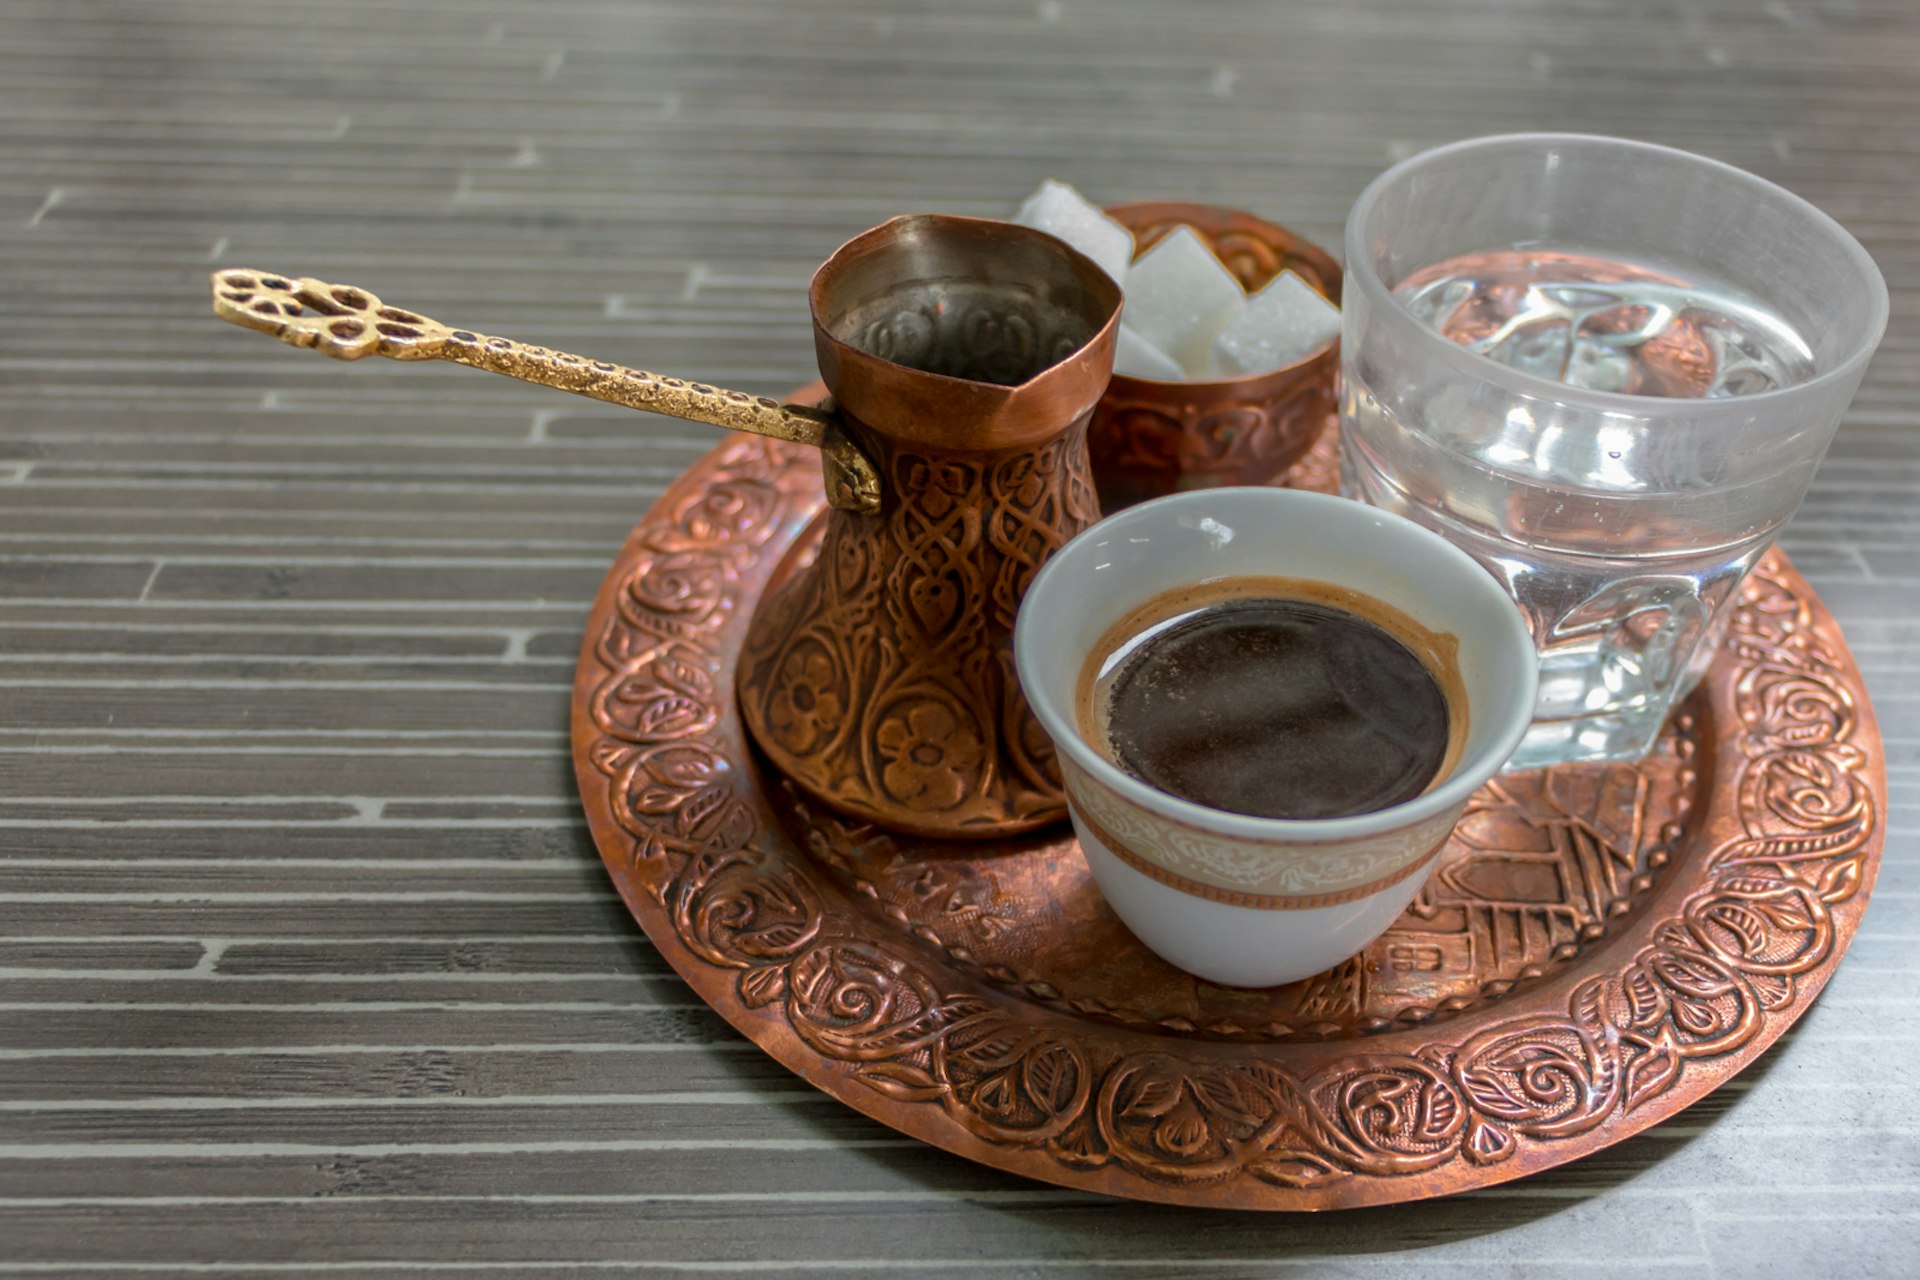 A cup of traditional Bosnian coffee with a glass of water and sugar lumps